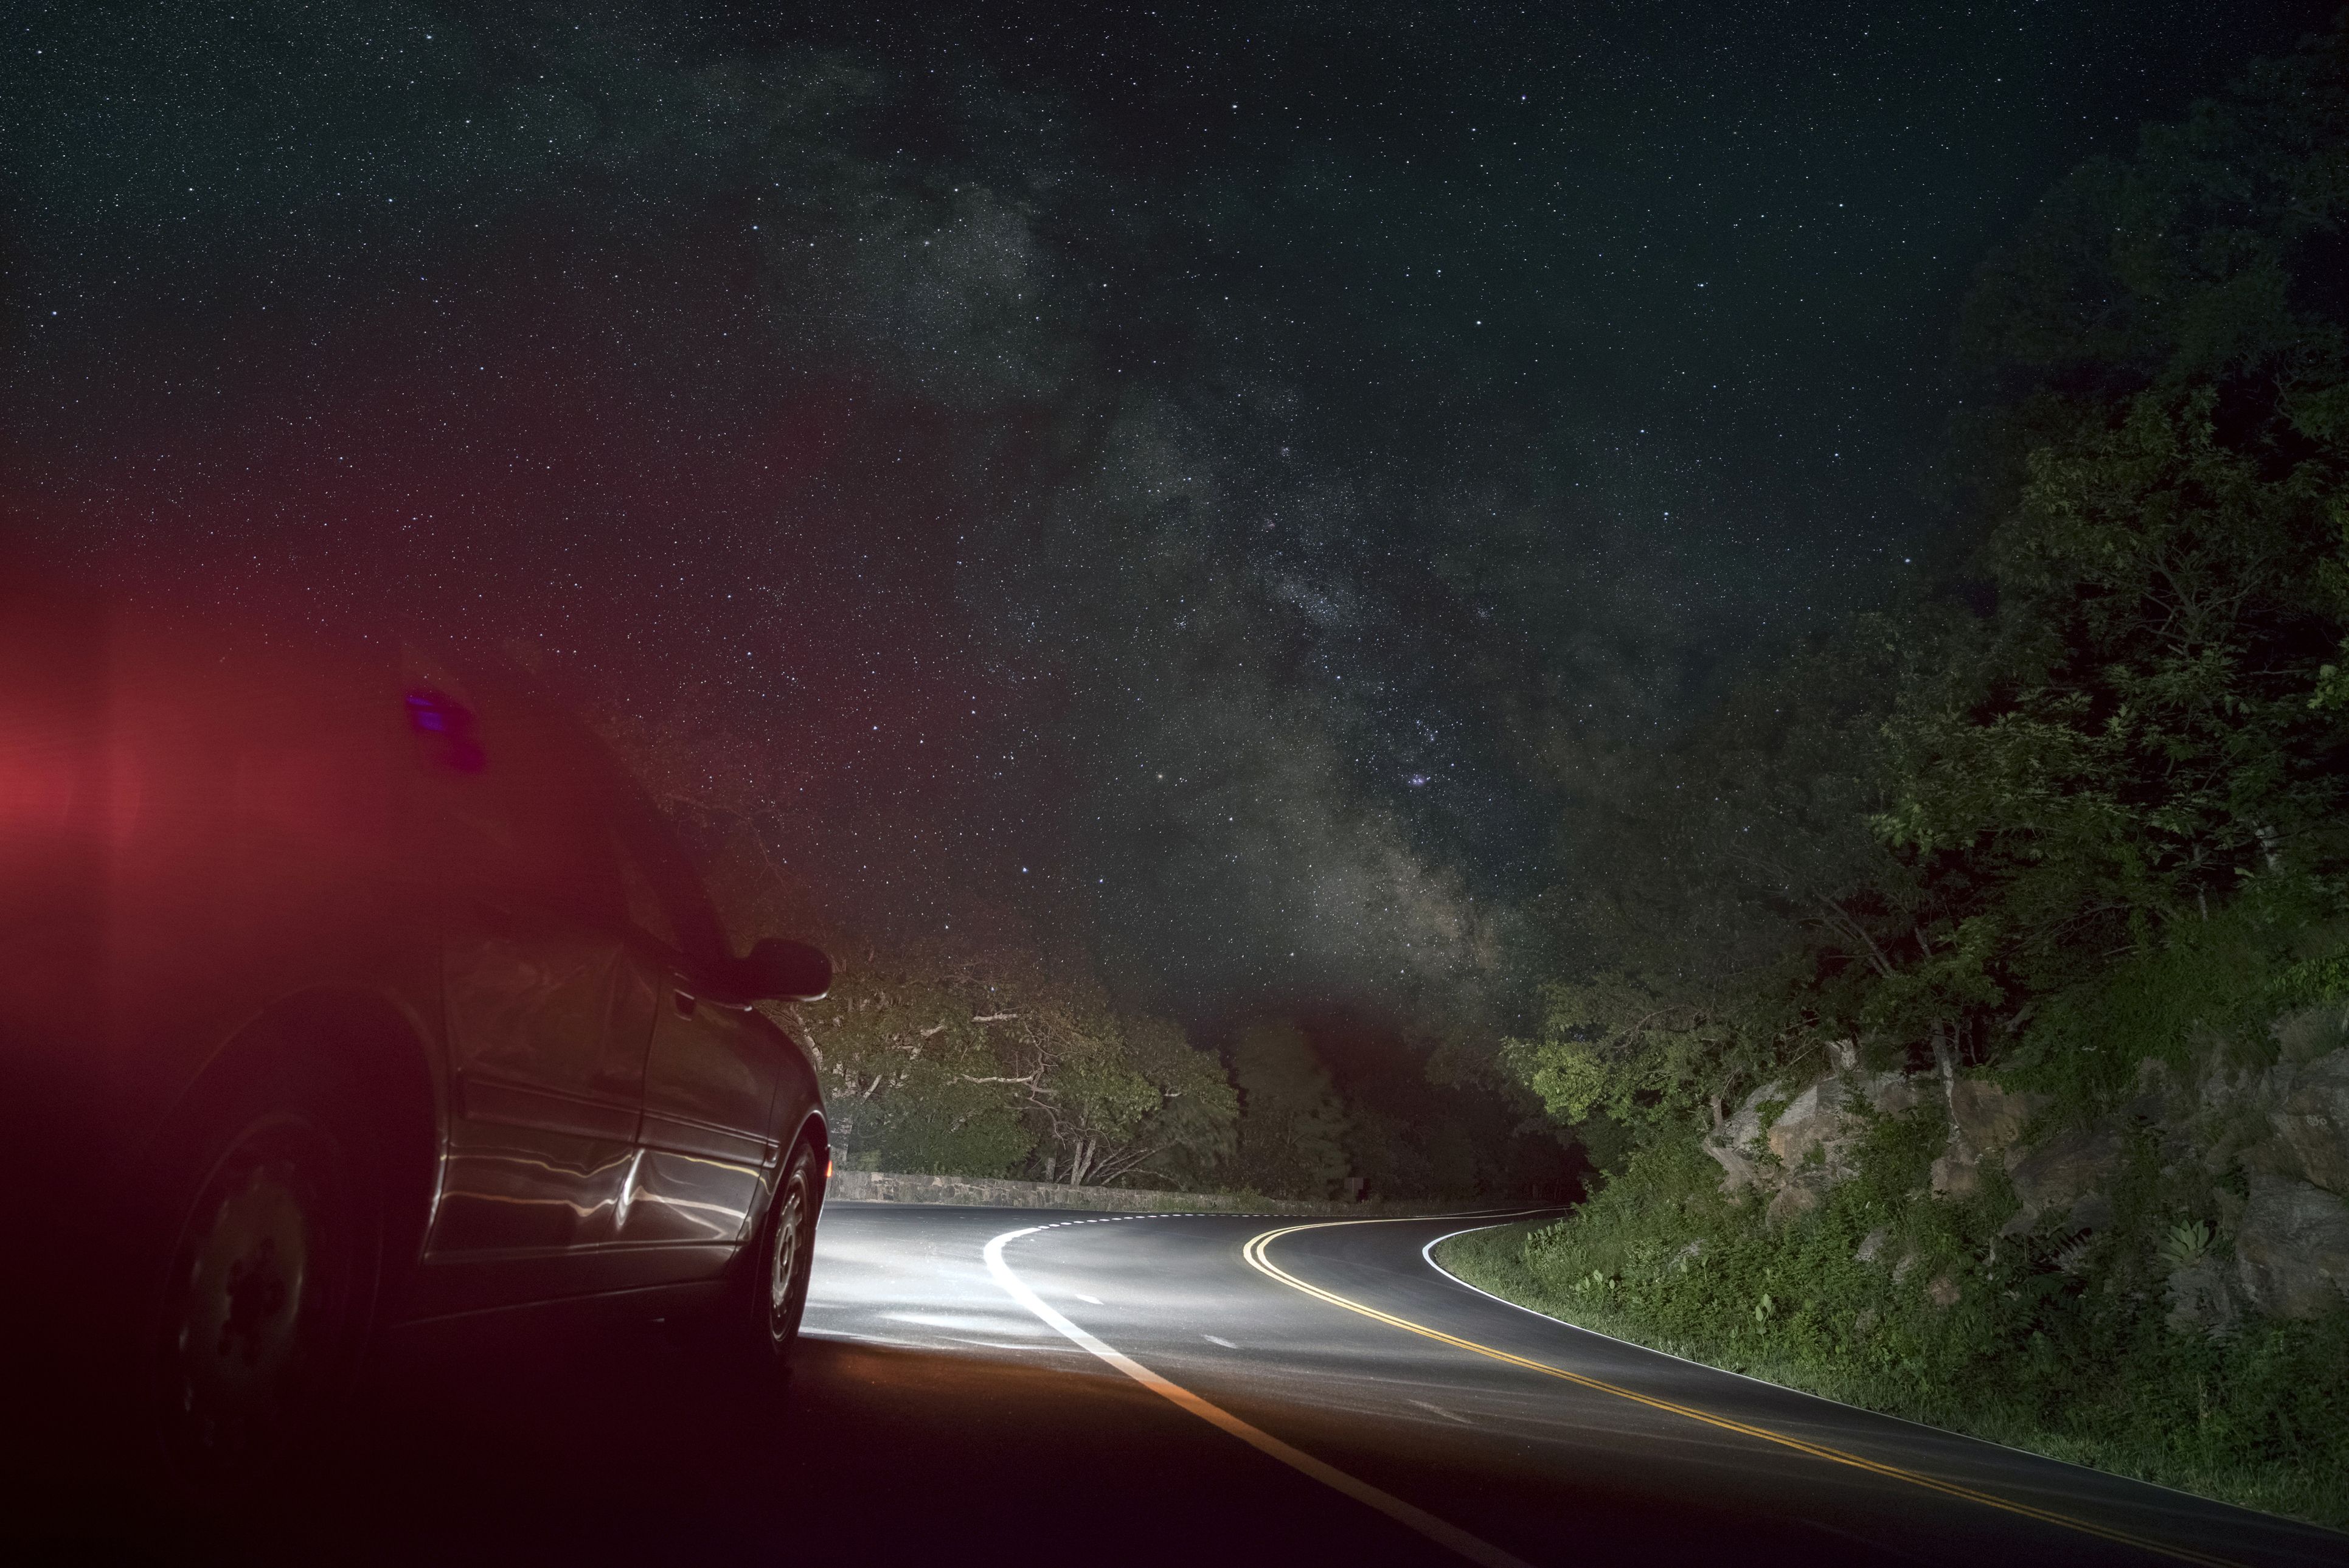 How to increase car headlight brightness for nighttime driving. Key tips